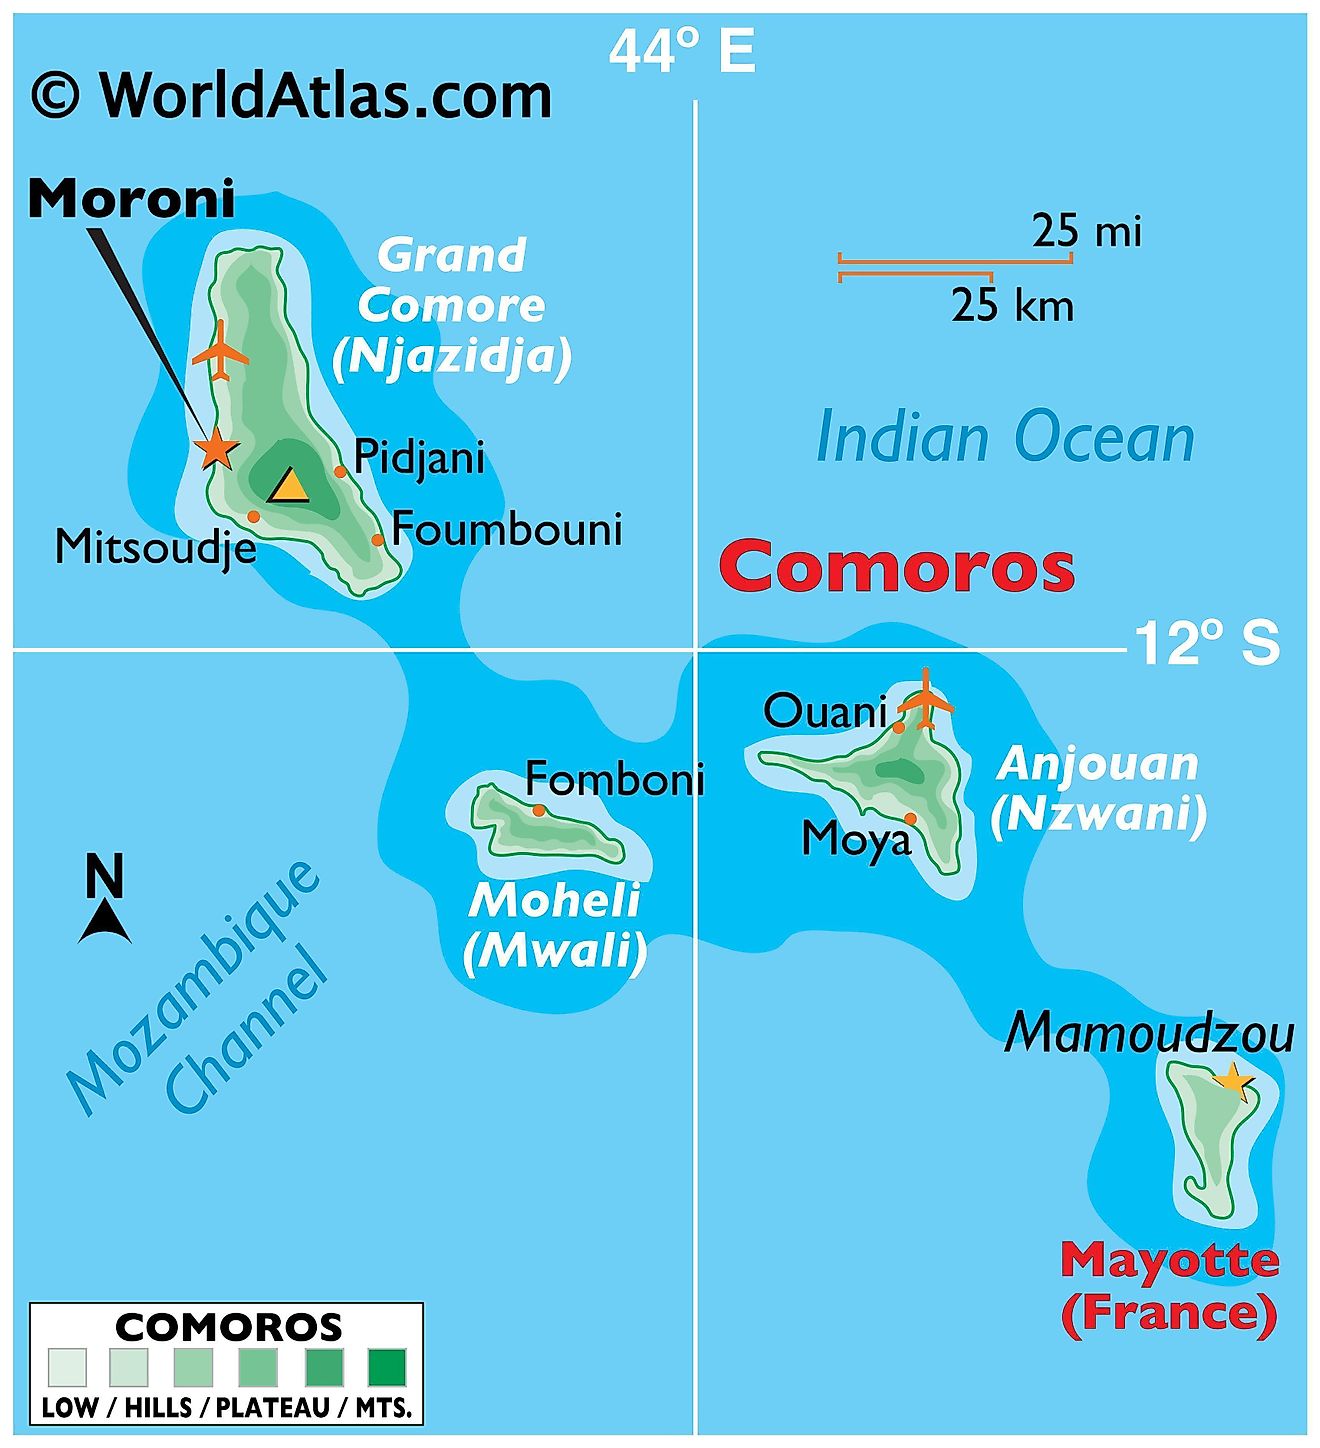 Physical Map of Comoros showing the four main islands, surrounding water bodies, the topography of the islands, important settlements, and the highest point in the country.